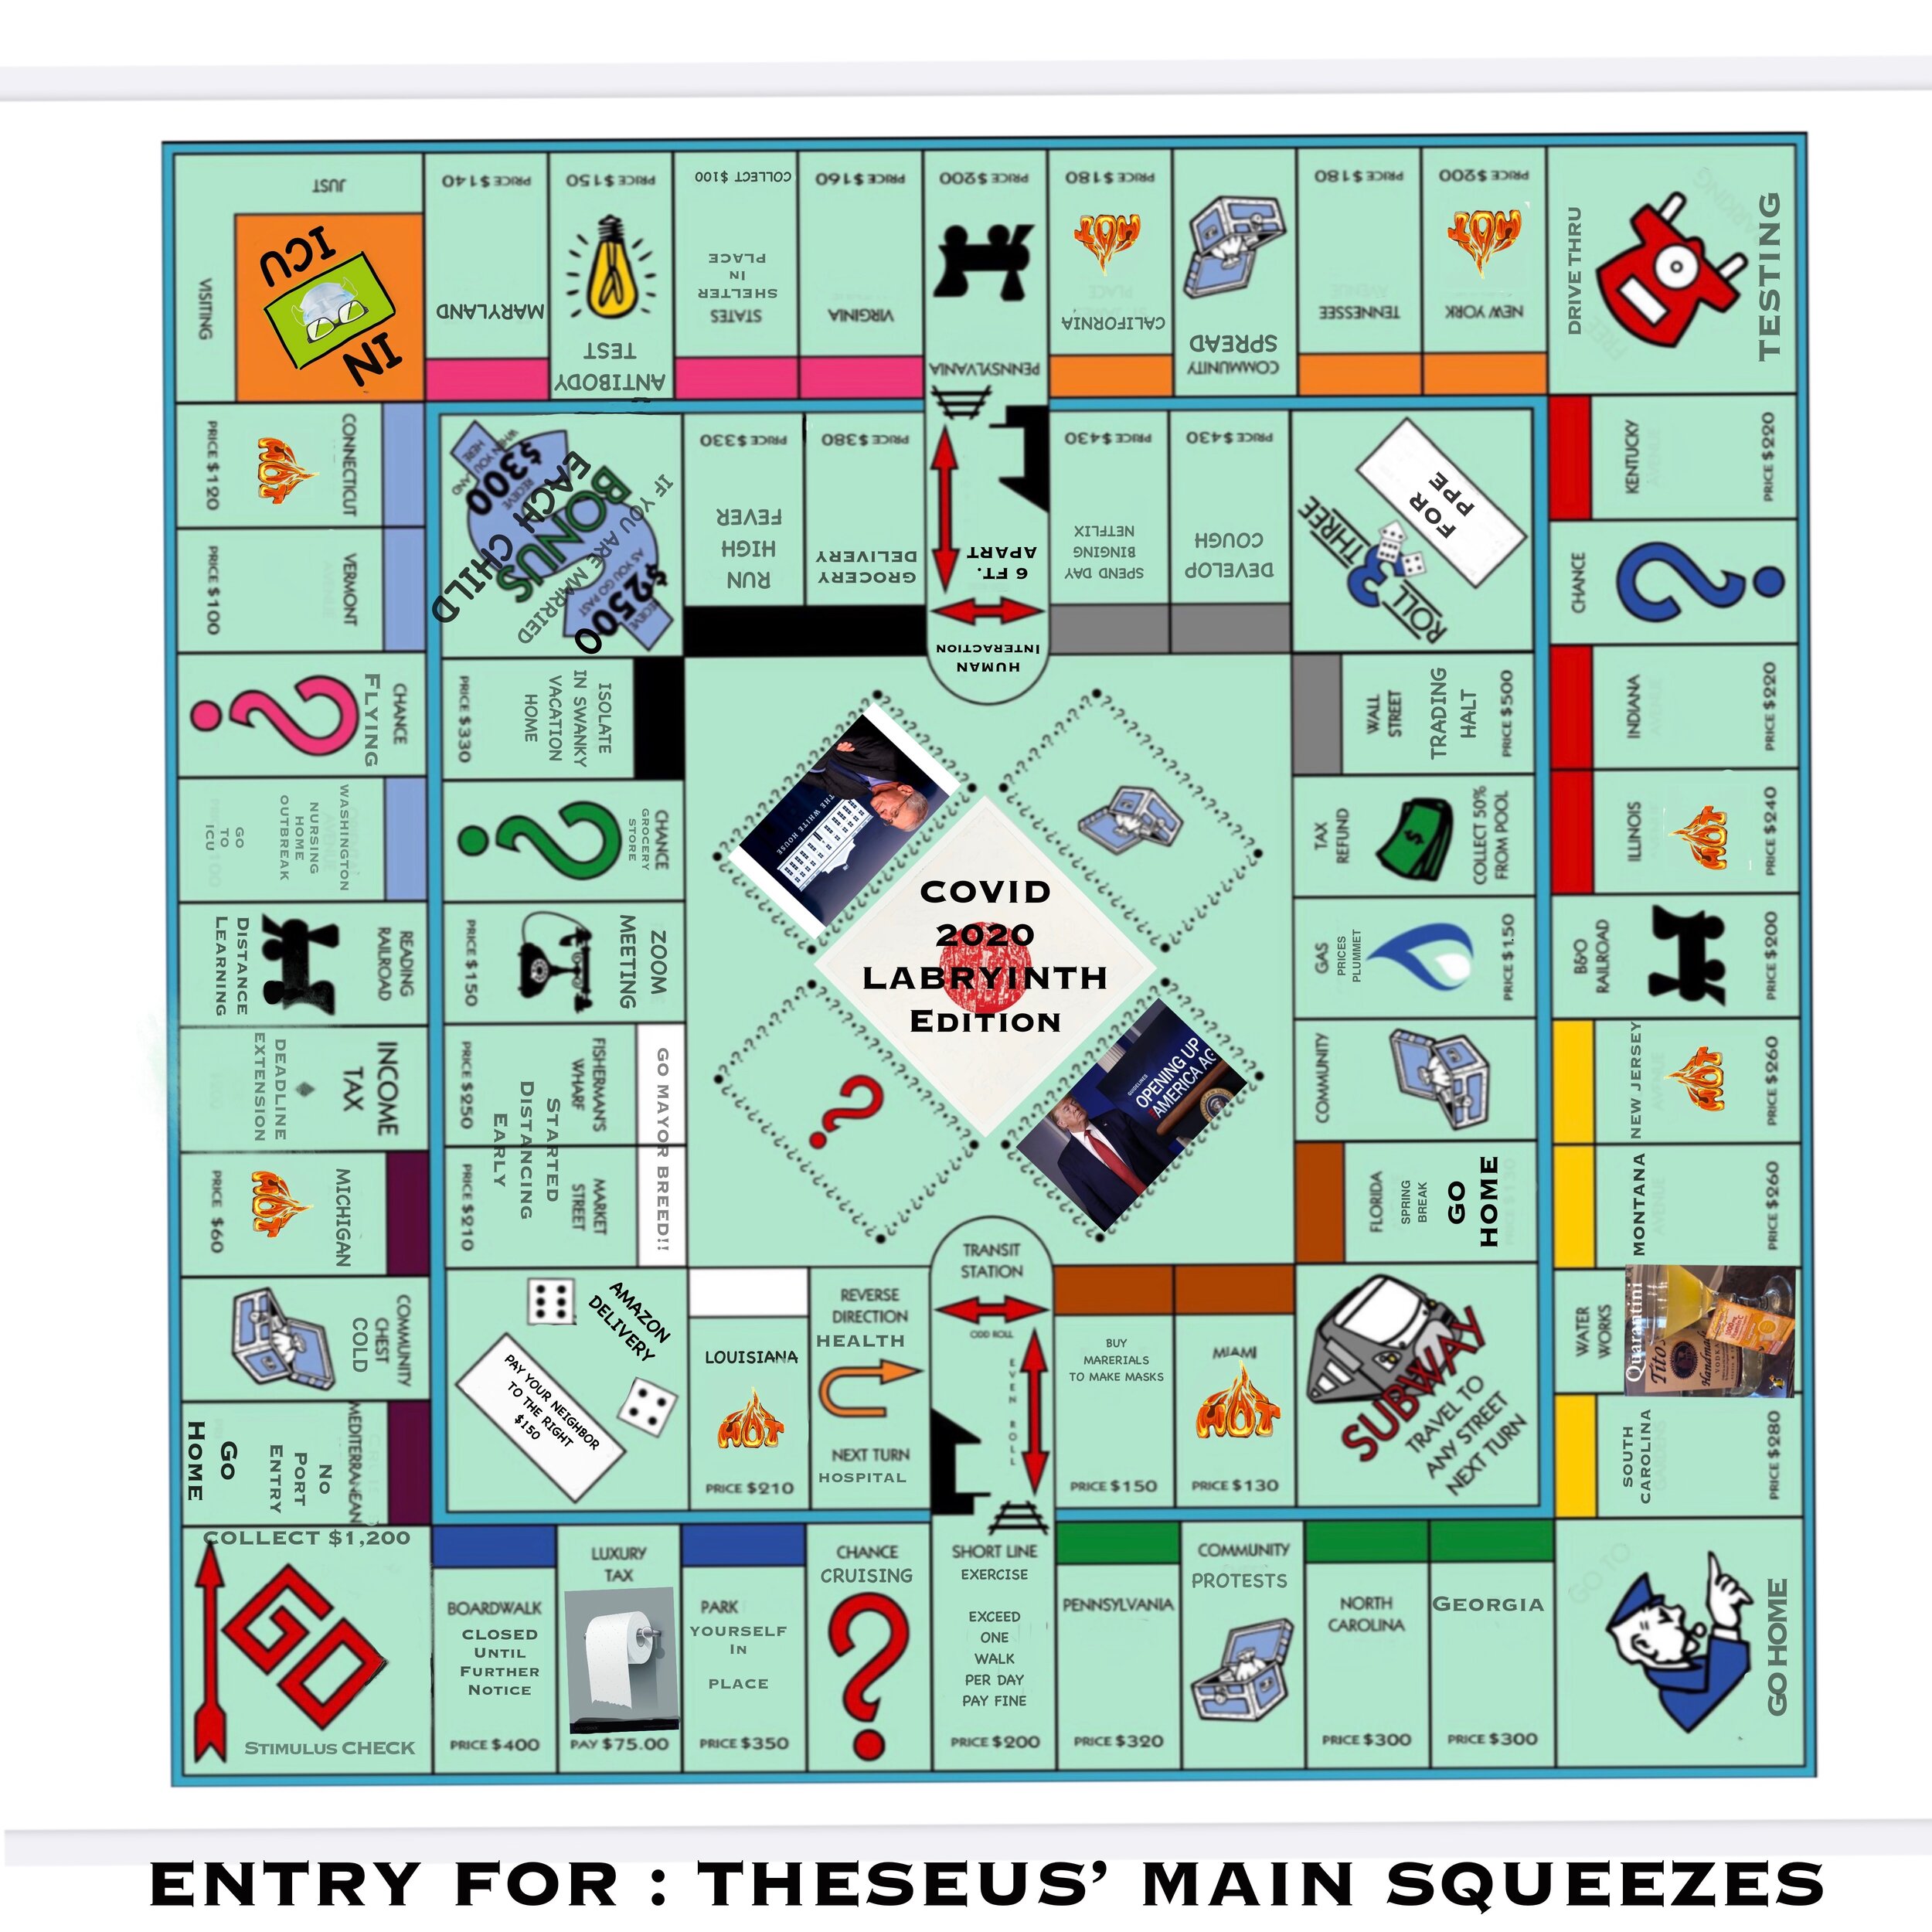  A  Monopoly Maze  from Theseus’ Main Squeezes. Image courtesy of Angel Ysaguirre. 